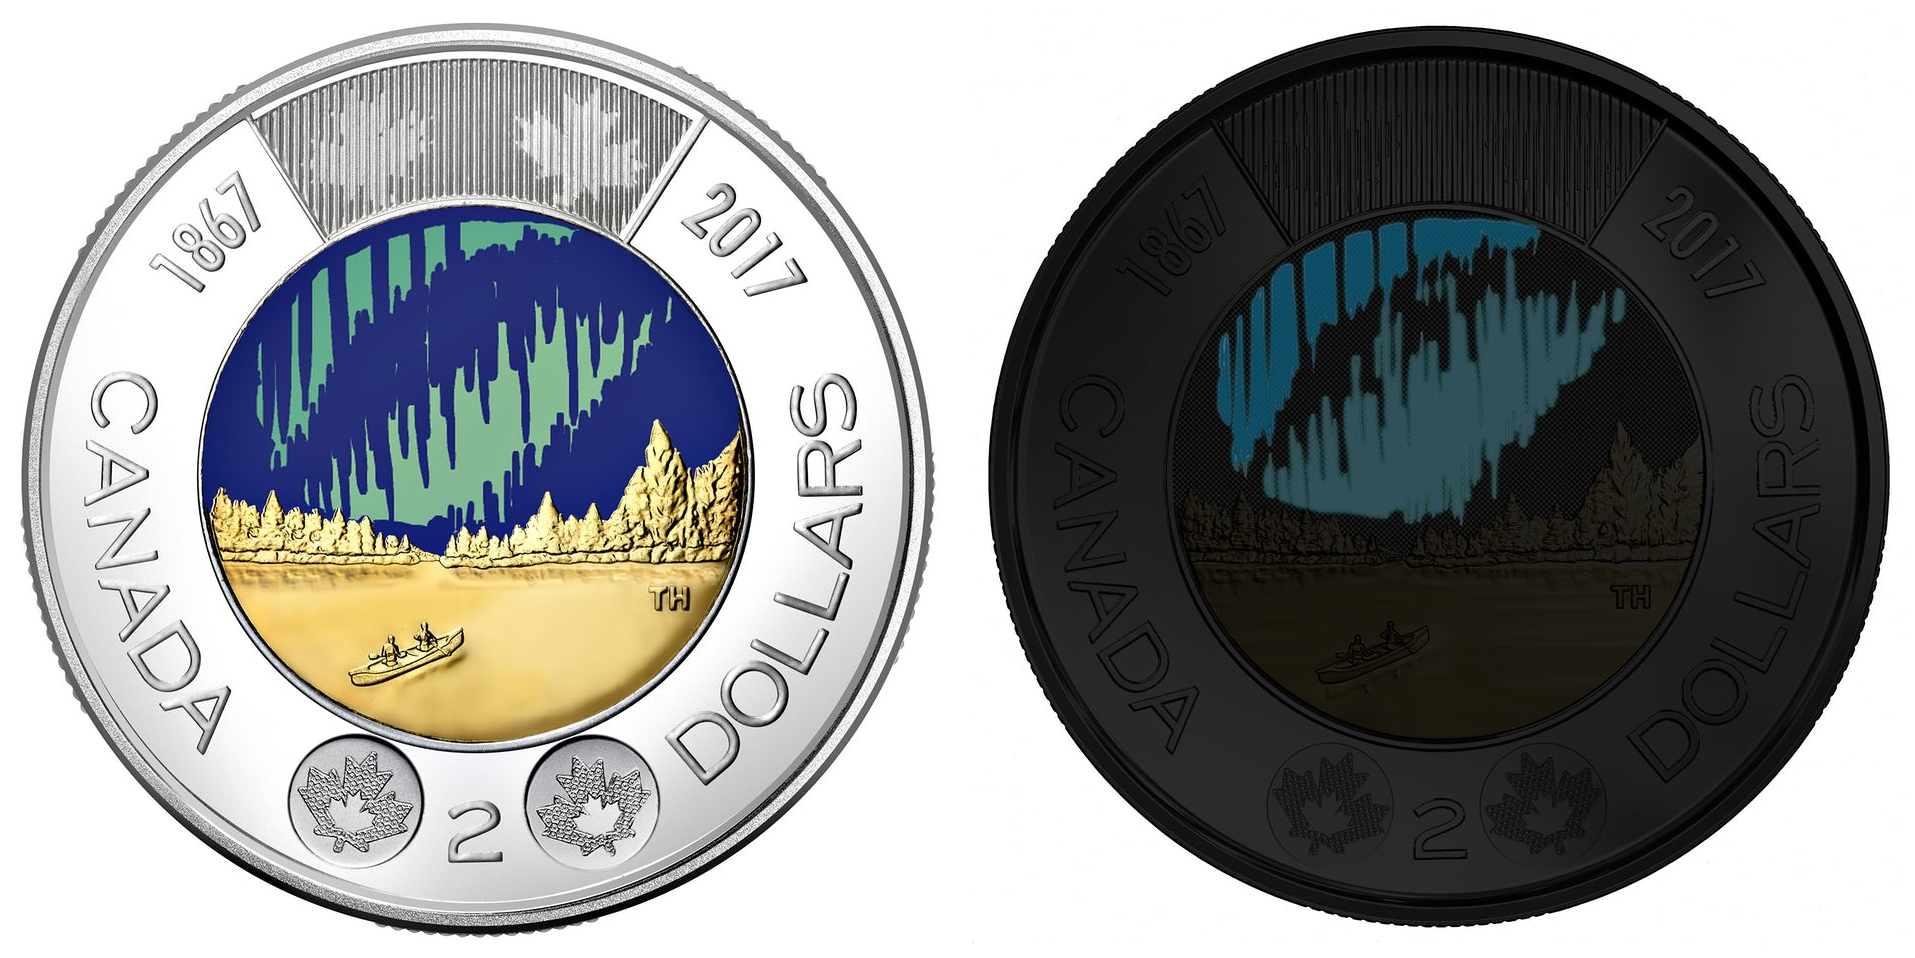 World's first glow-in-the-dark coin: Canada World's first glow-in-the-dark coin: Canada